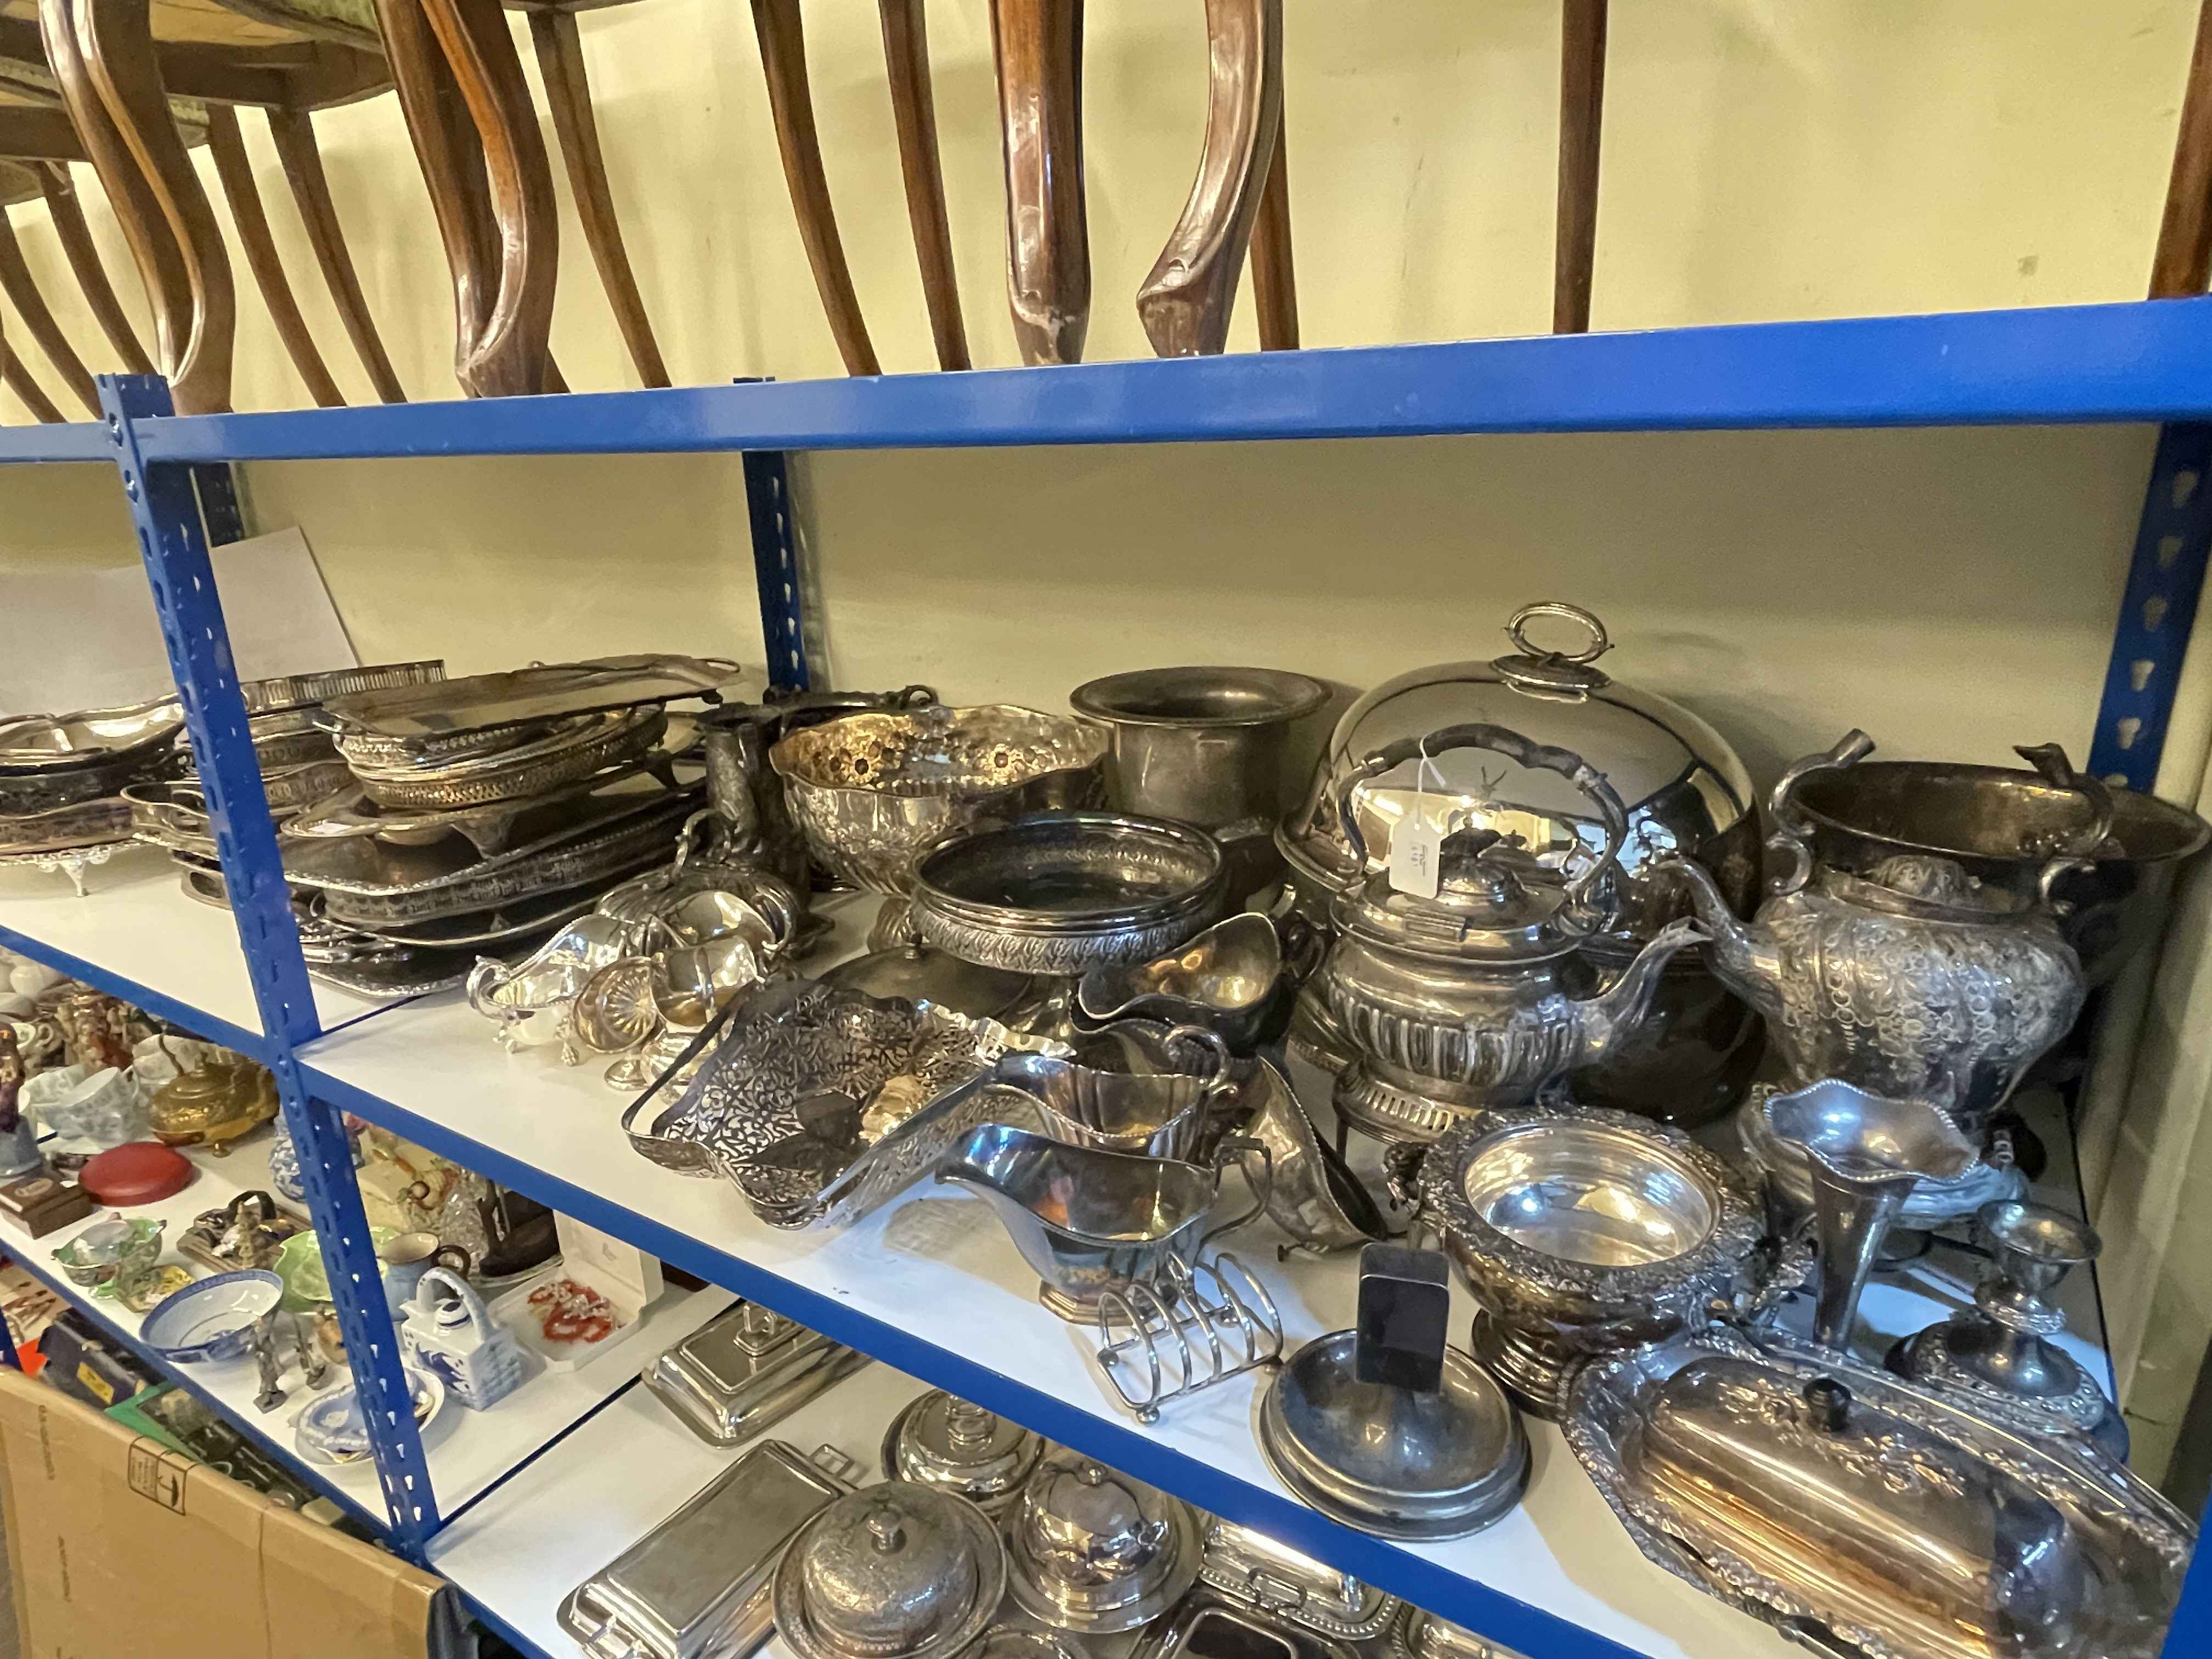 Collection of silver plated wares including punch bowl, serving trays, tureen lids, cream jugs, etc.